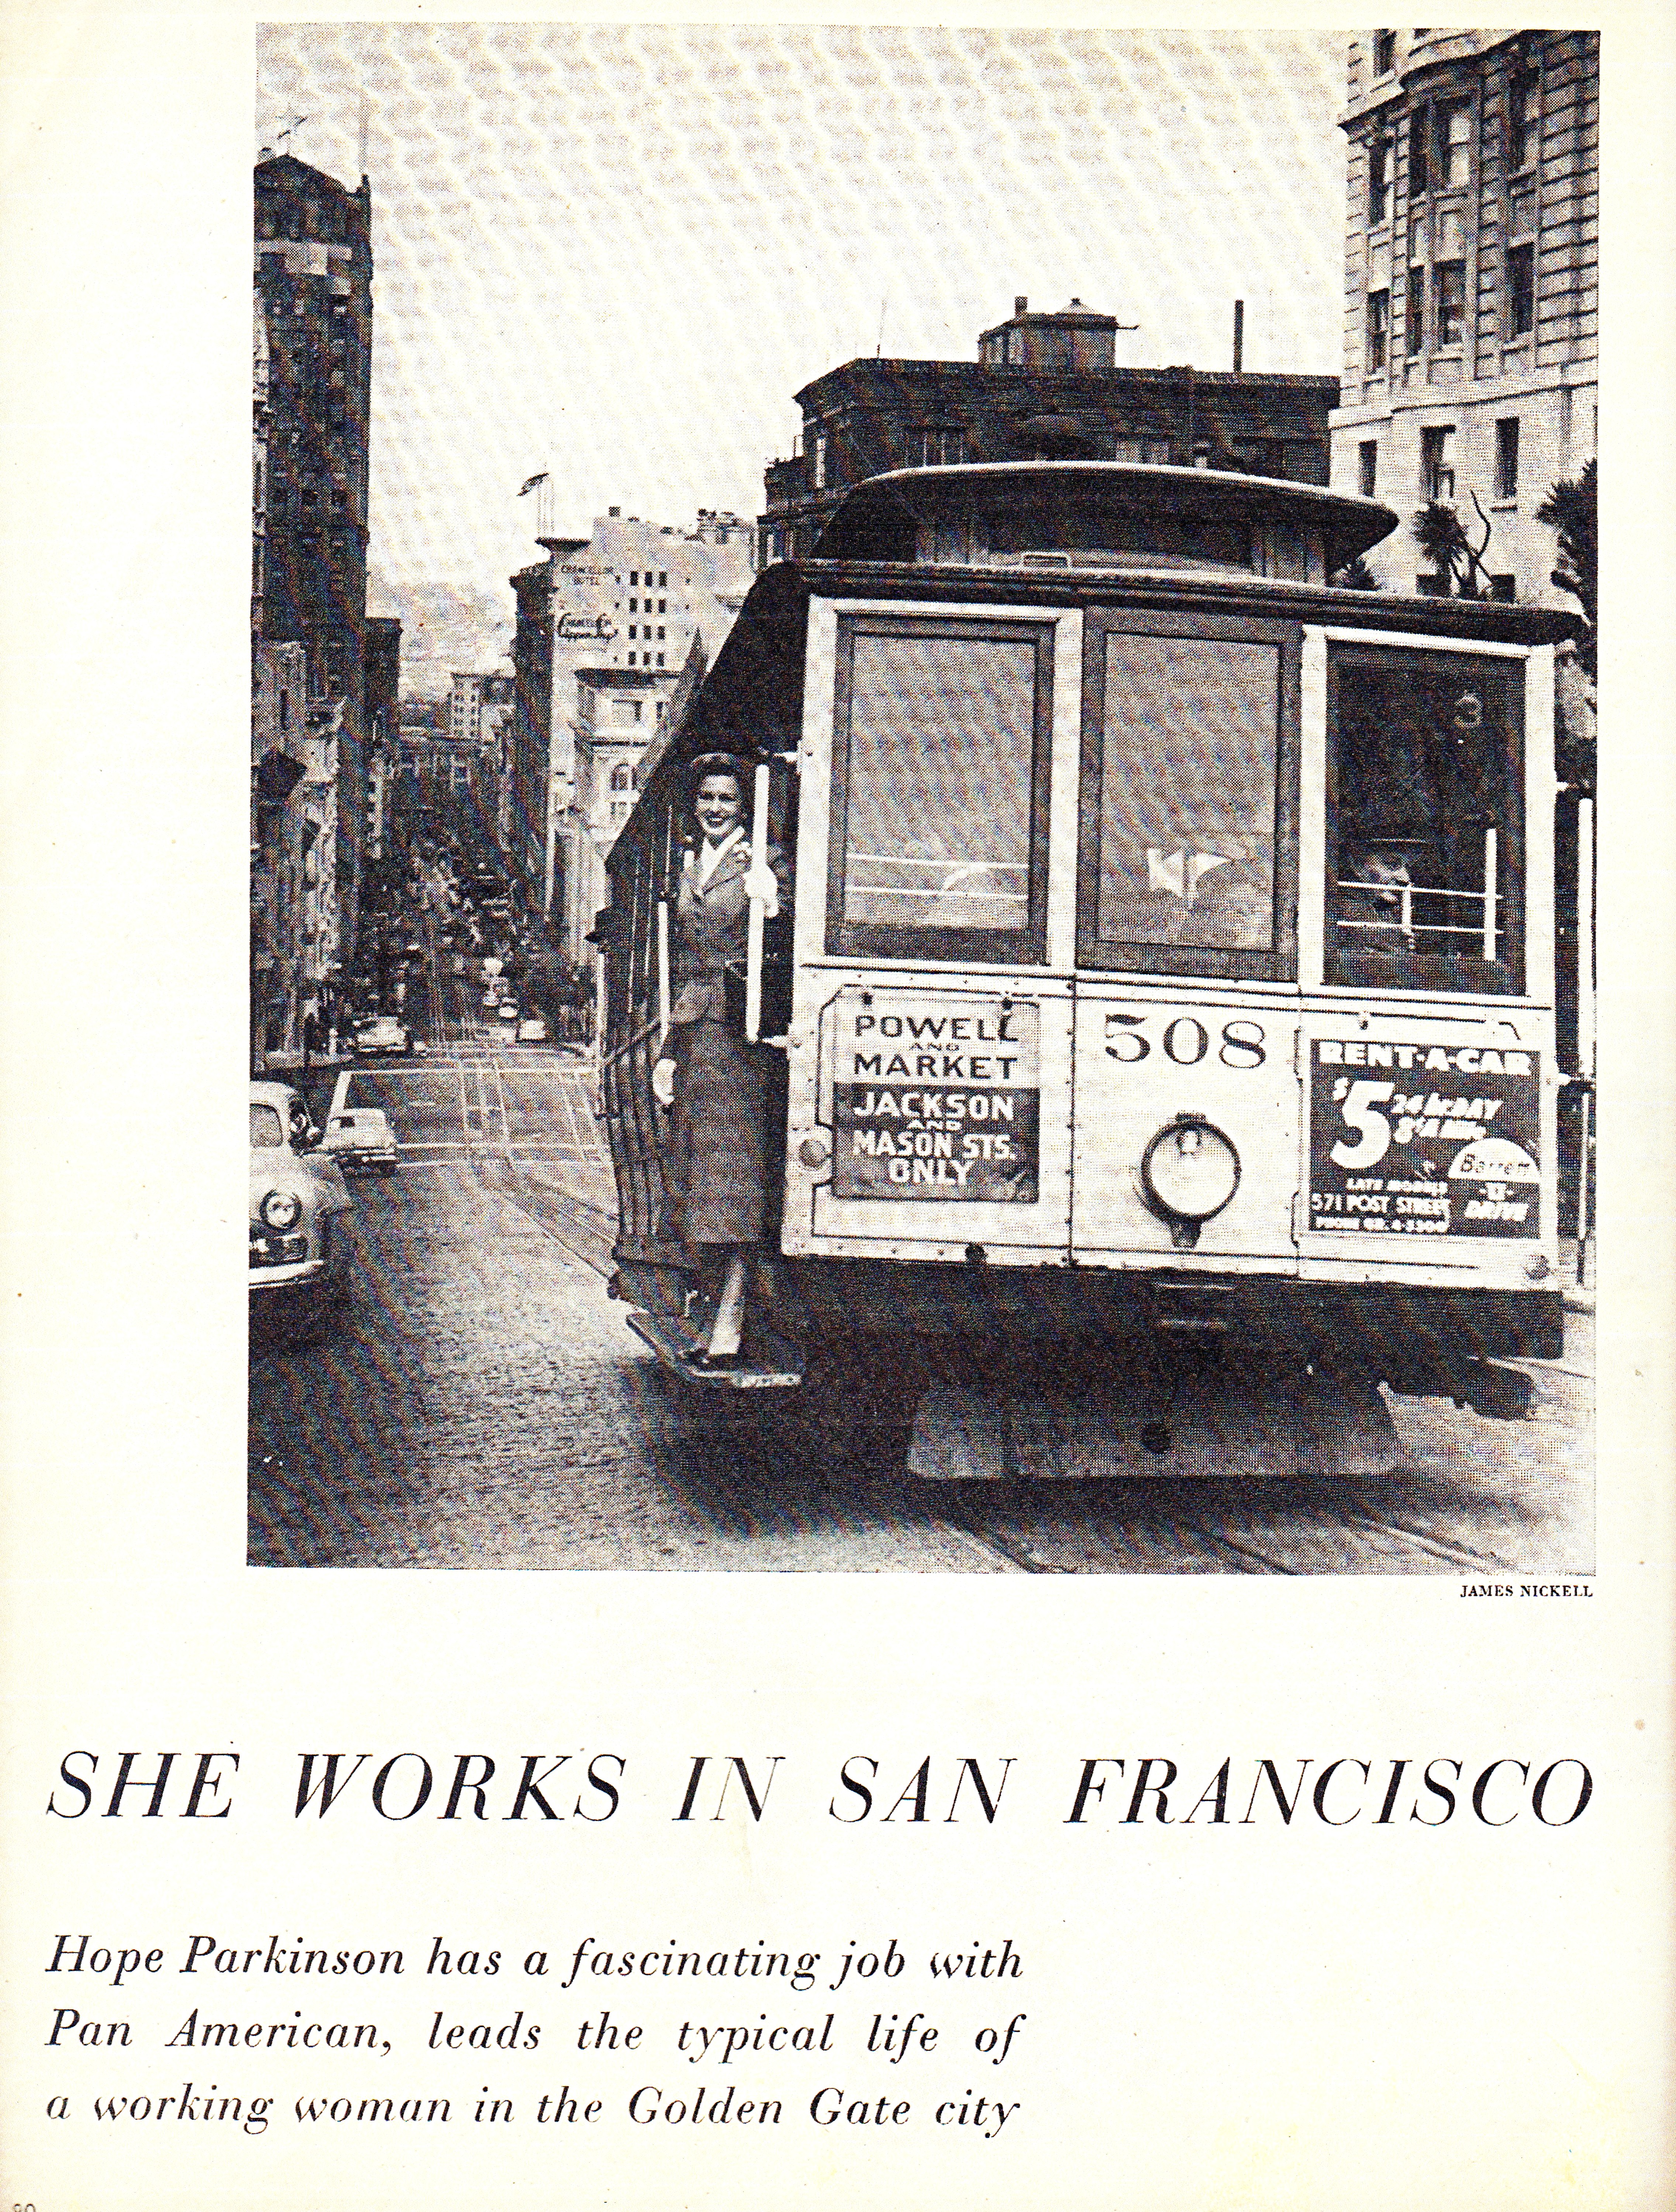 Photograph from "She Works In San Francisco" an article from "Charm - The Magazine for Women Who Work" provided by Thomas Kewin.